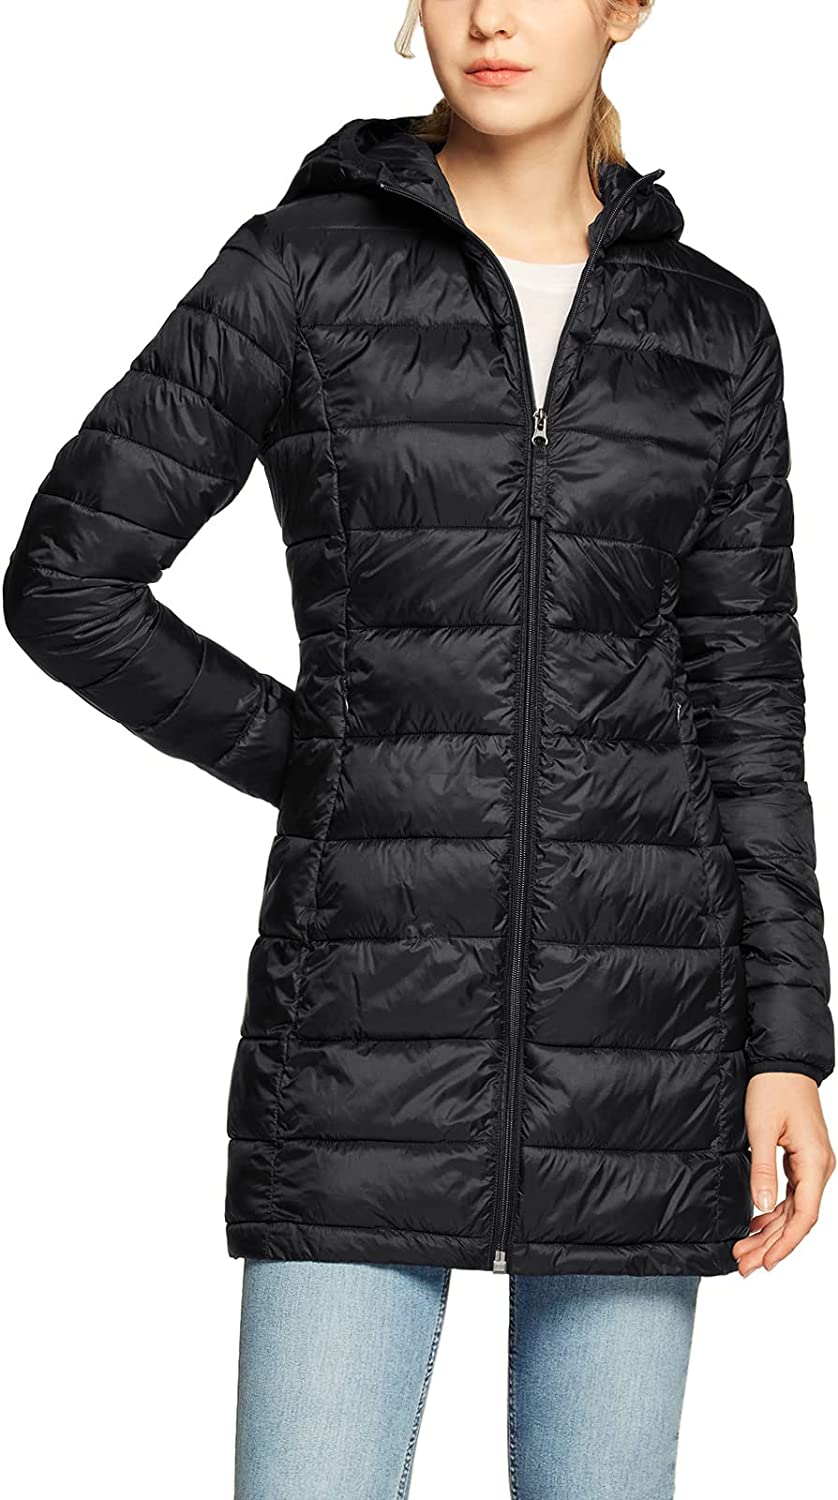  TSLA Women's Lightweight Packable Accent Puffer Jacket,  Water-Resistant Winter Coat : Clothing, Shoes & Jewelry